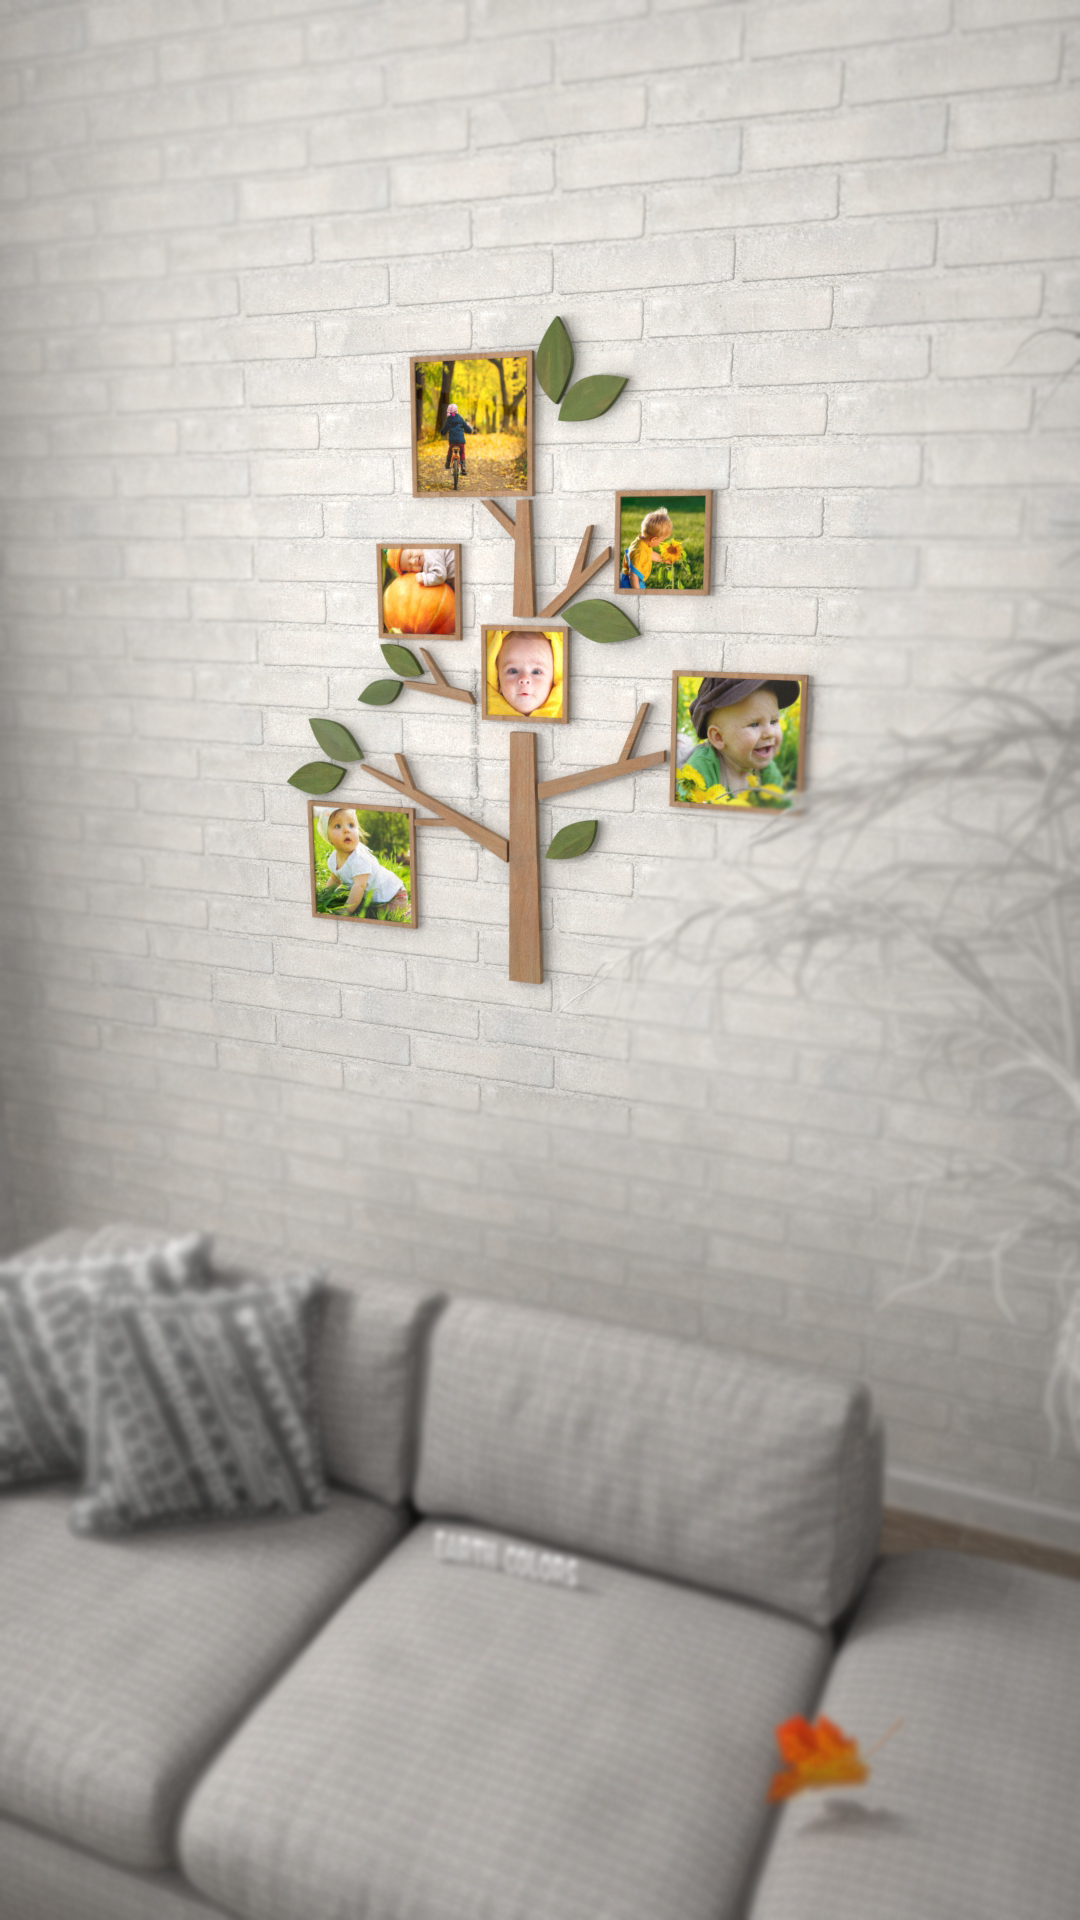 Show entire family upbringing through Family tree canvas